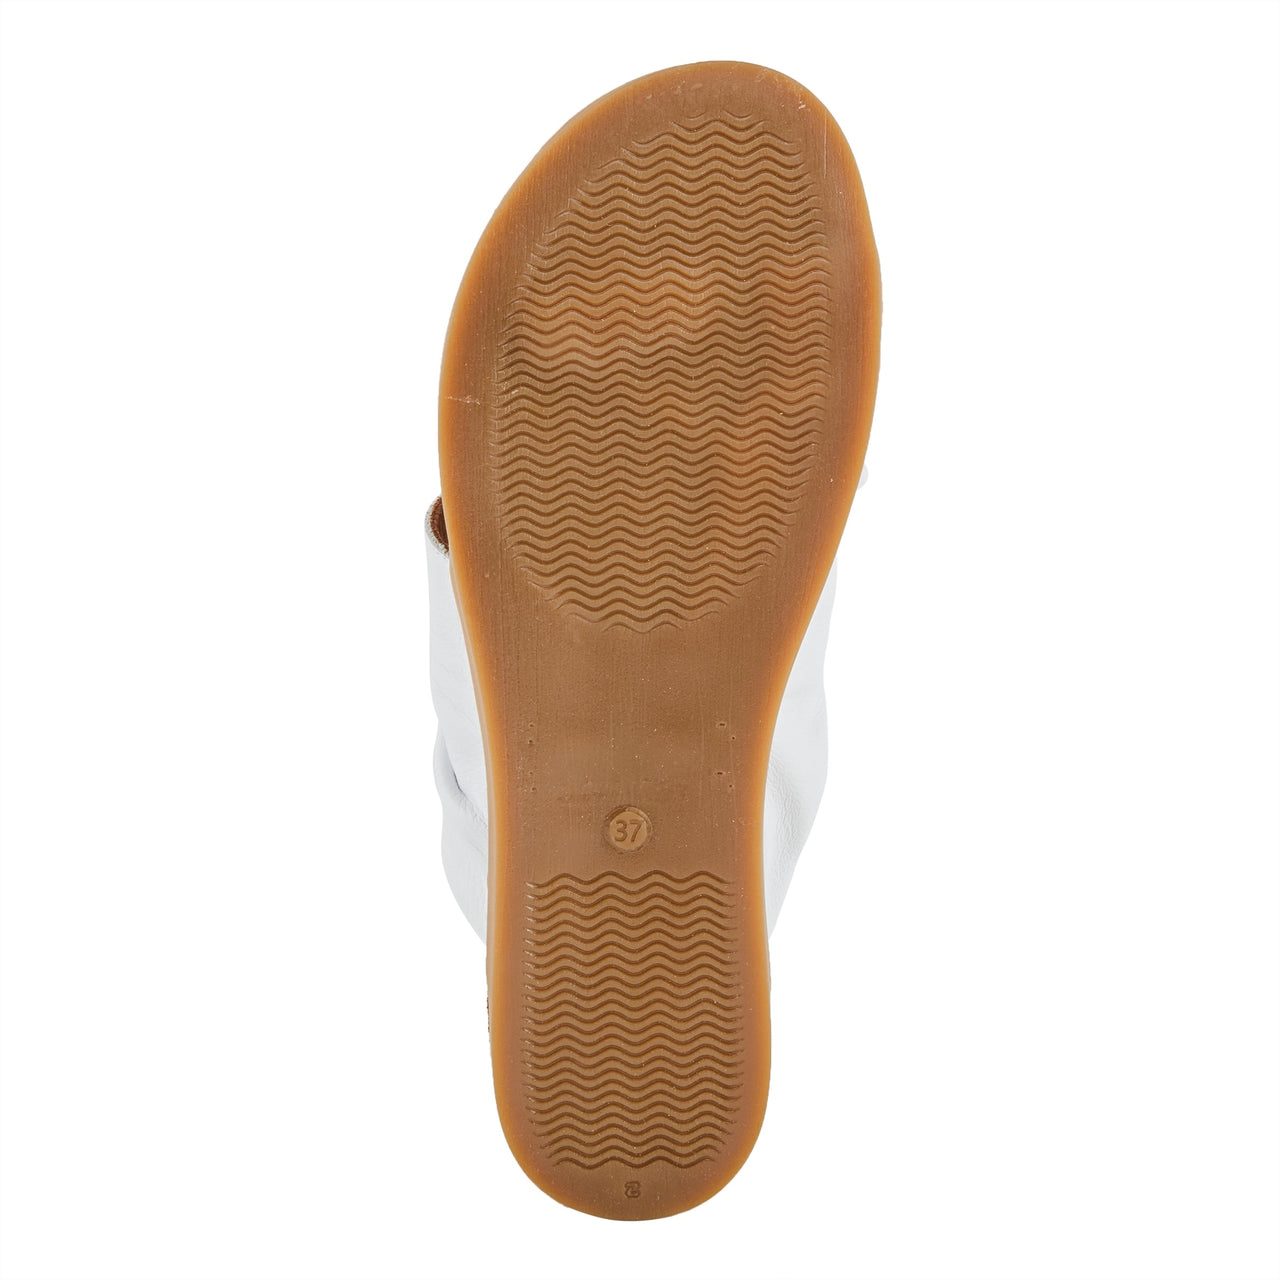 A close-up image of the Spring Step Bates Sandals in a stylish taupe color, featuring a cushioned footbed and adjustable hook-and-loop straps for maximum comfort and support